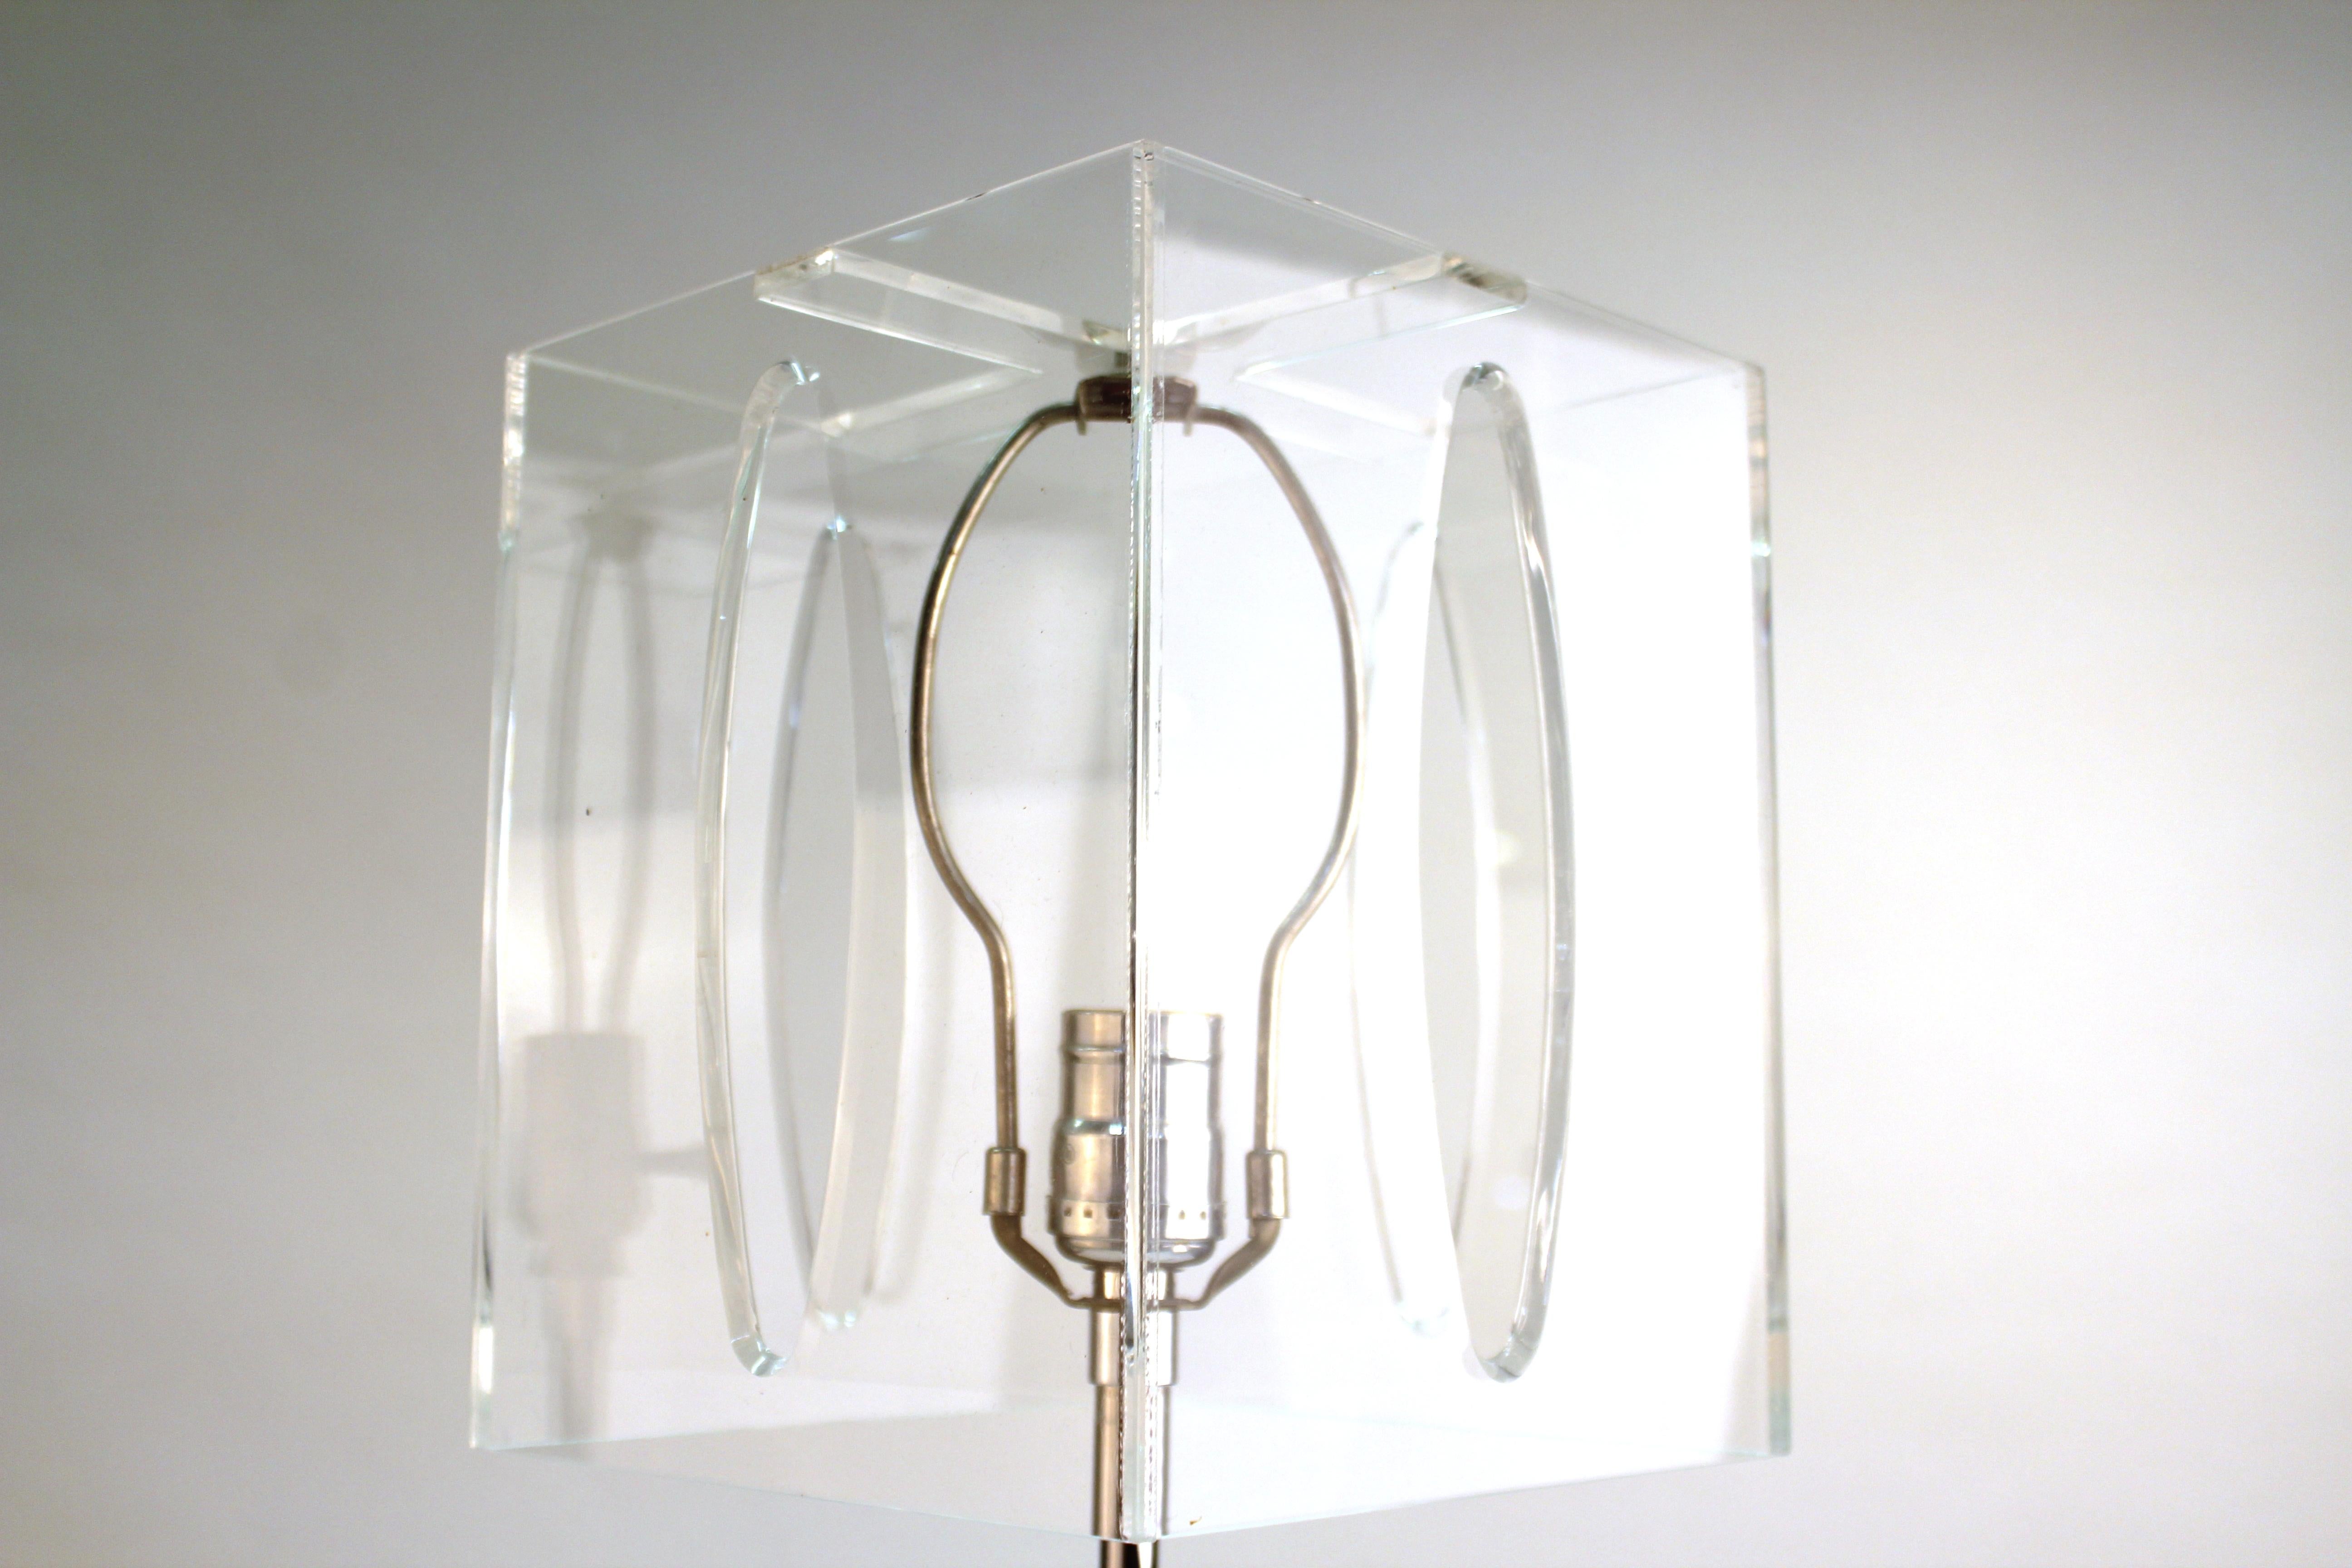 Mid-Century Modern table lamp with a fluted clear Lucite column stem and a perforated square clear Lucite shade. The piece is in great vintage condition with age-appropriate wear.